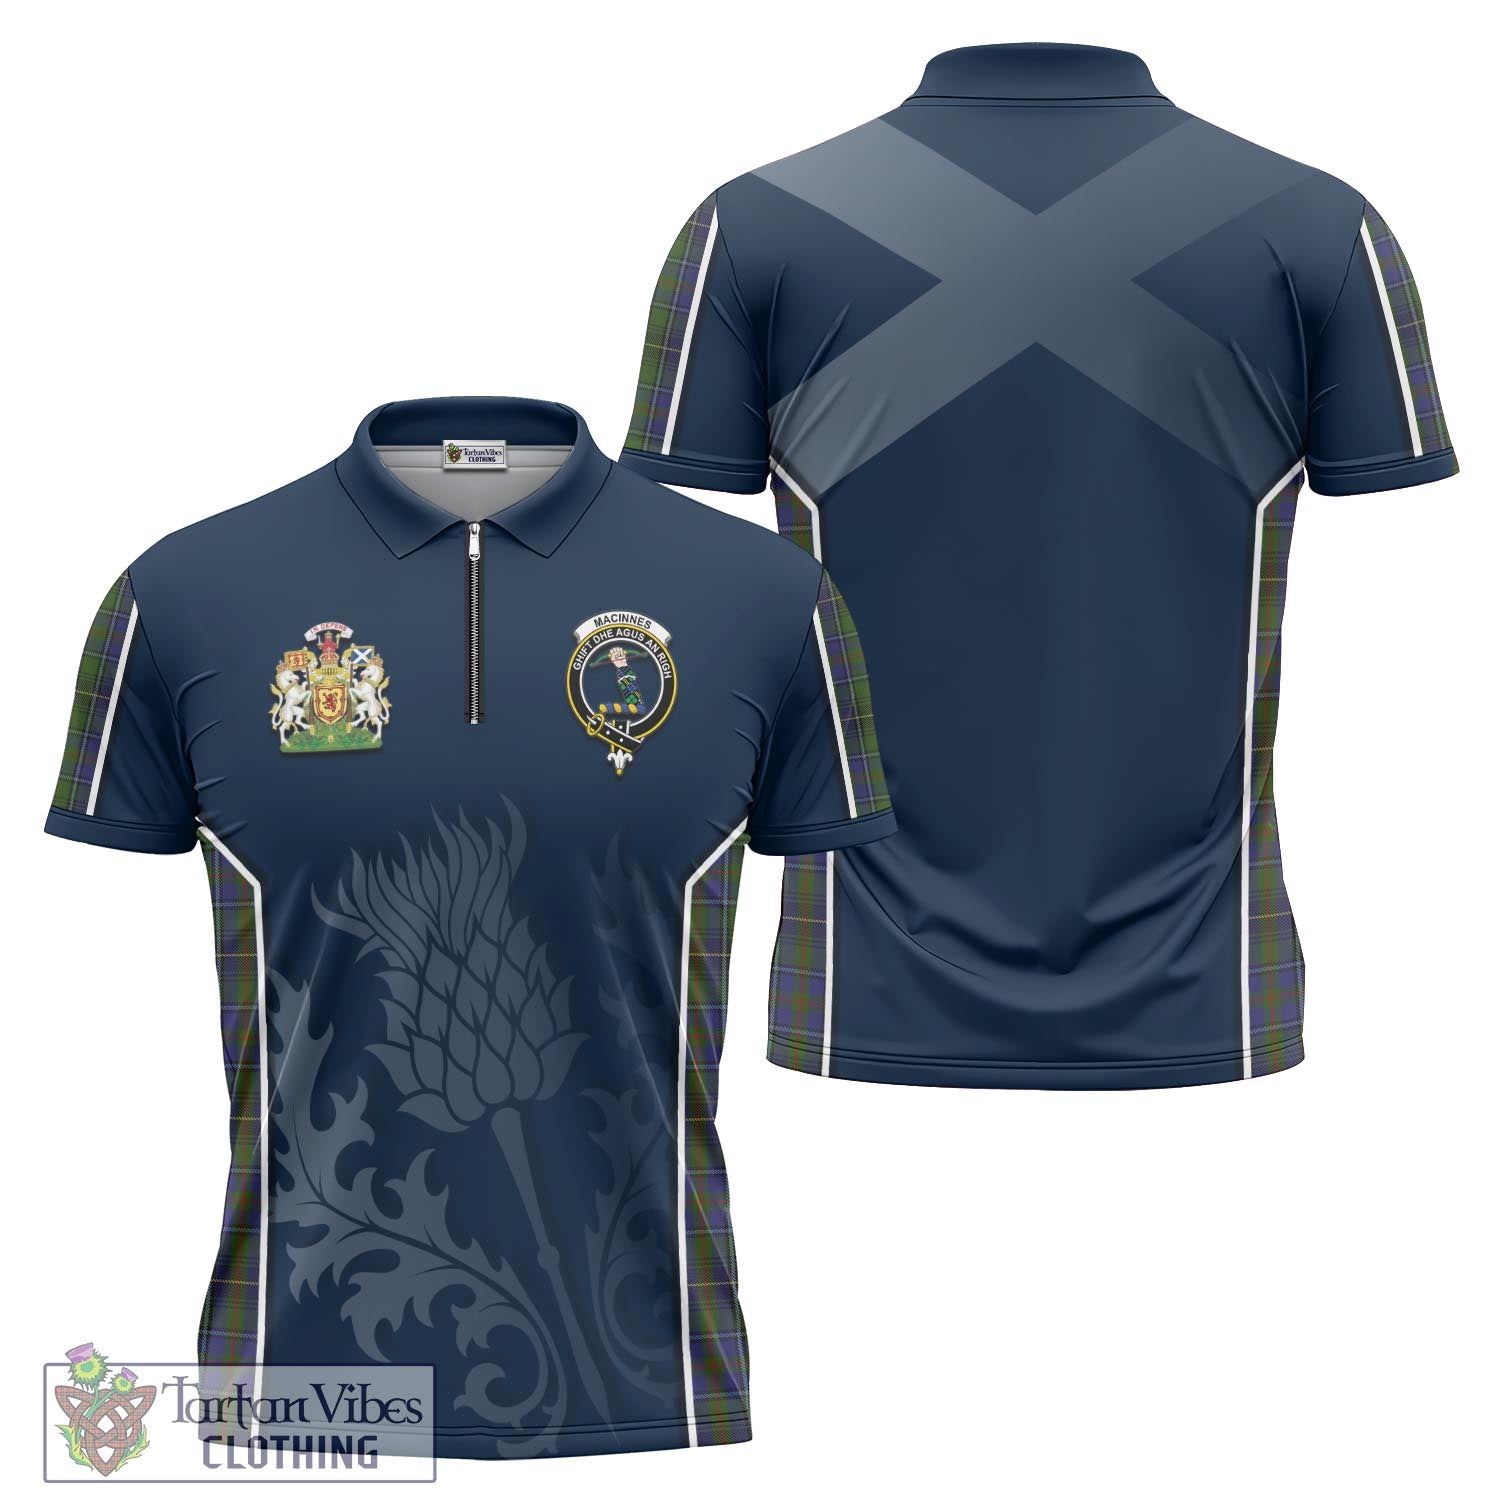 Tartan Vibes Clothing MacInnes Tartan Zipper Polo Shirt with Family Crest and Scottish Thistle Vibes Sport Style